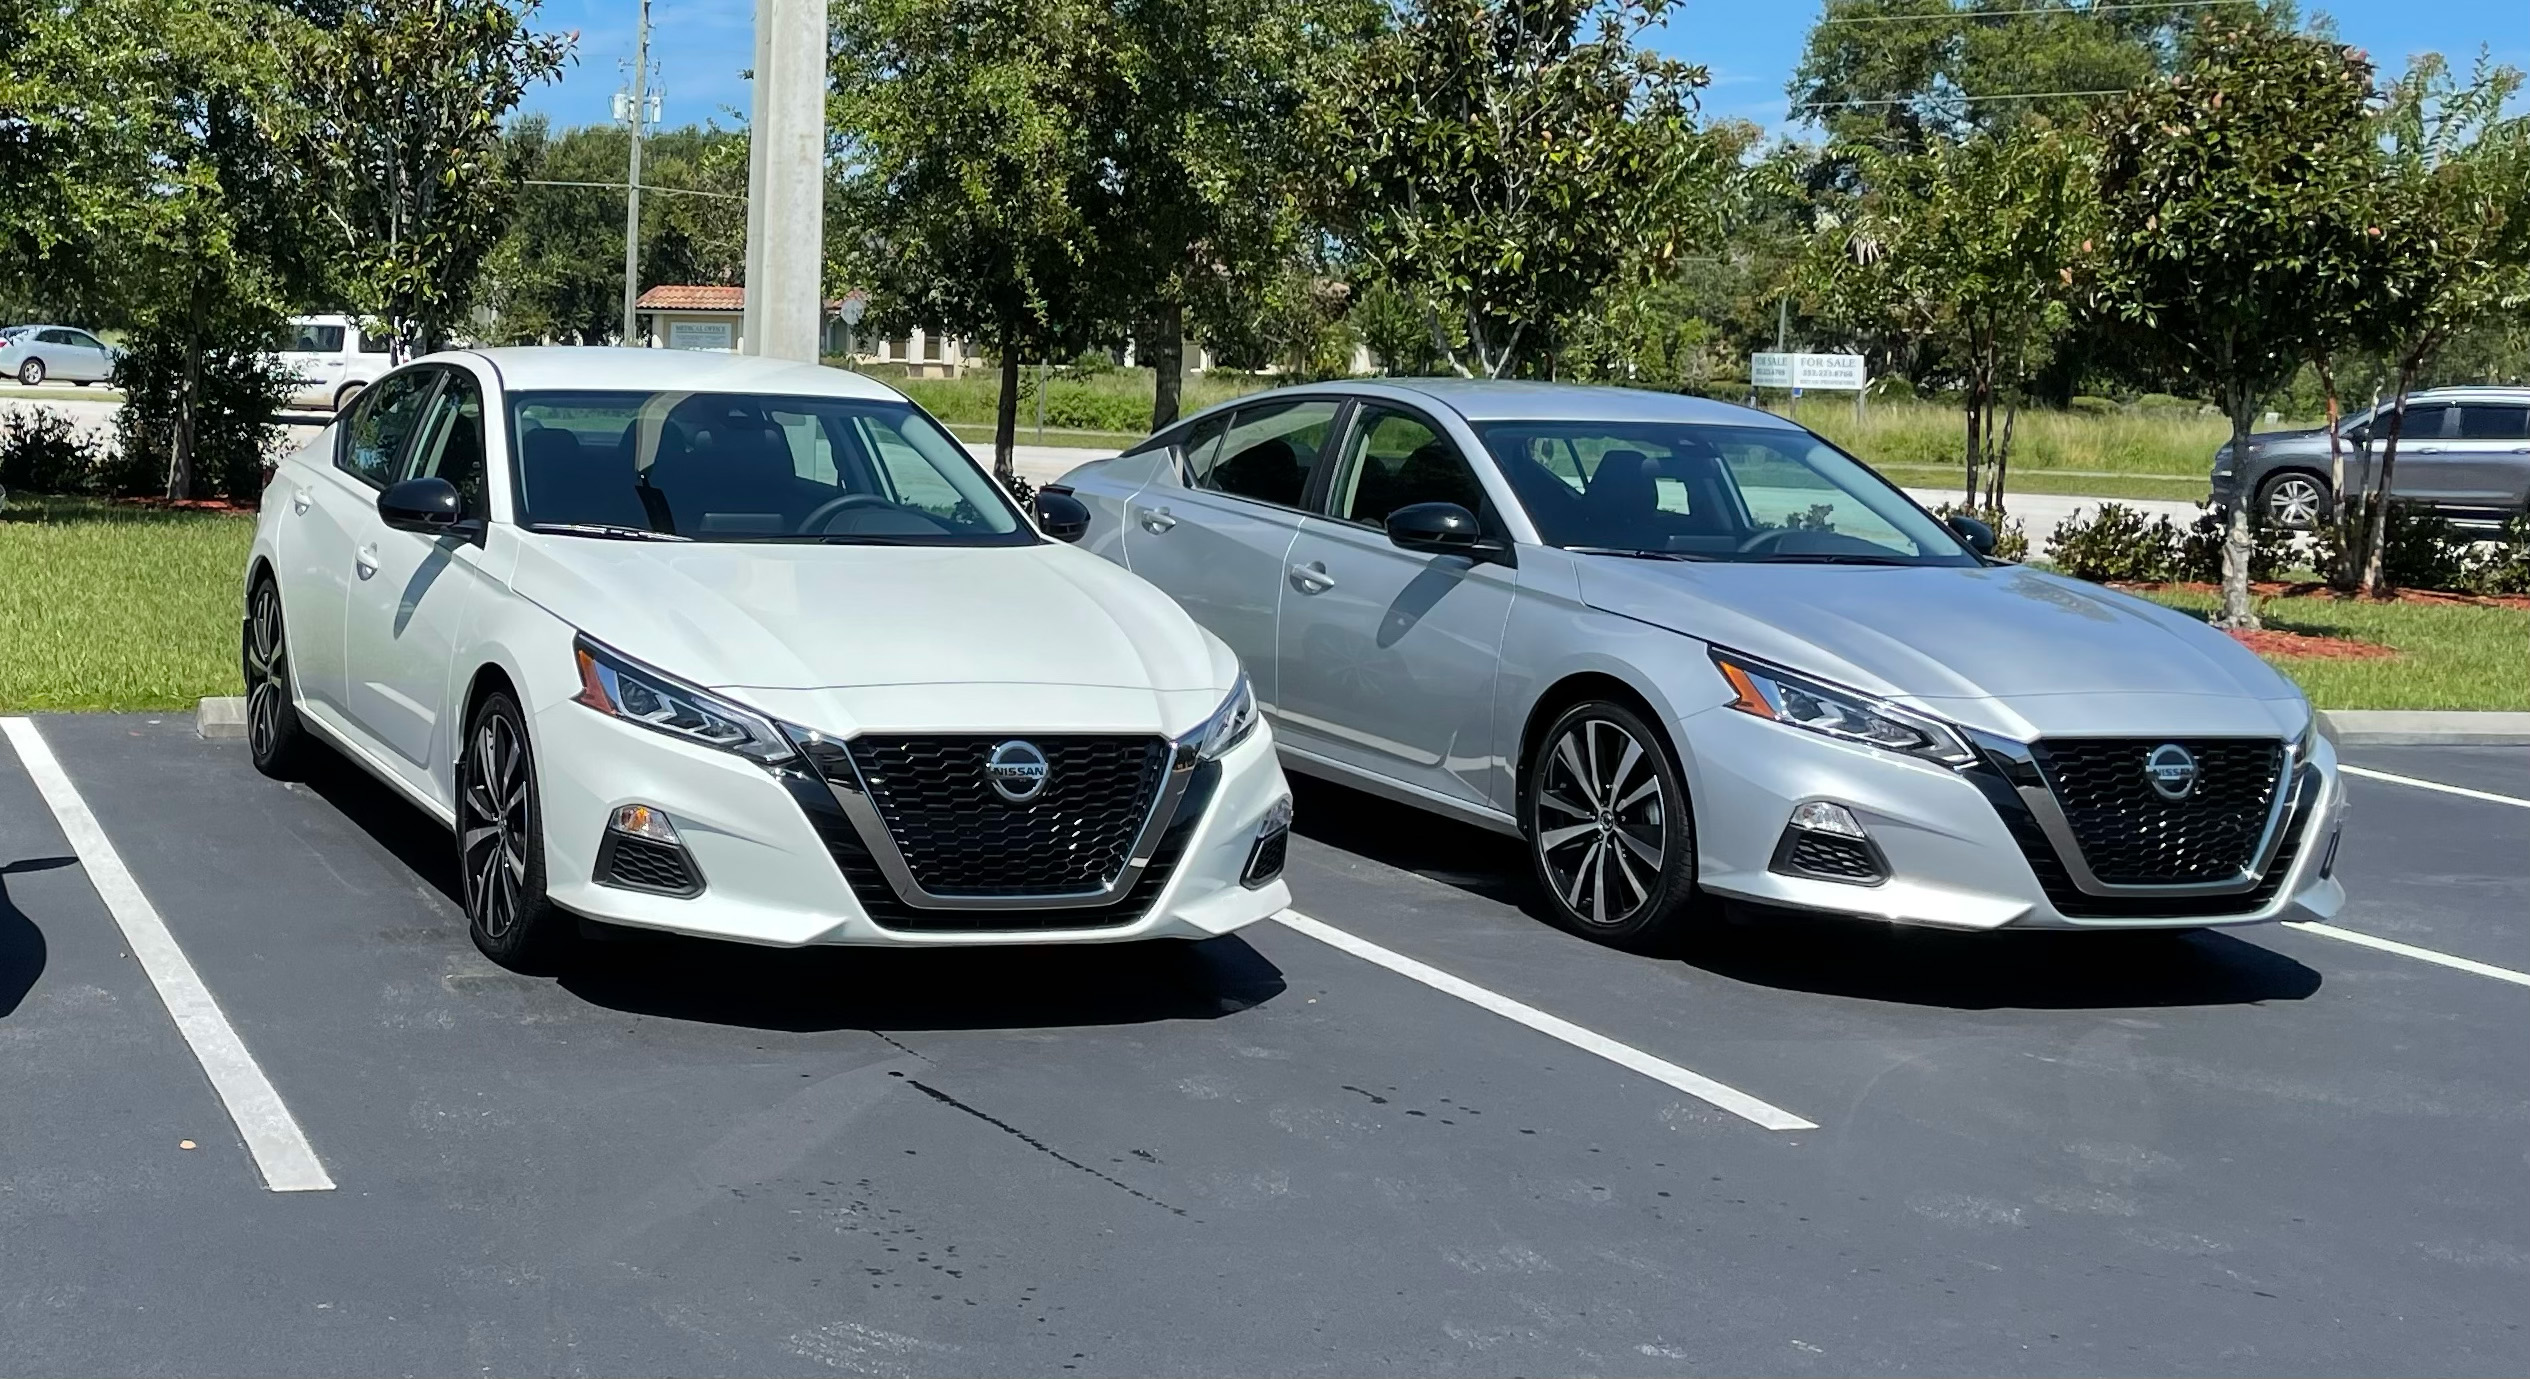 Photo of Tax Collector's Office Driving Test Vehicles, two Nissan Altimas parking next to each other. 